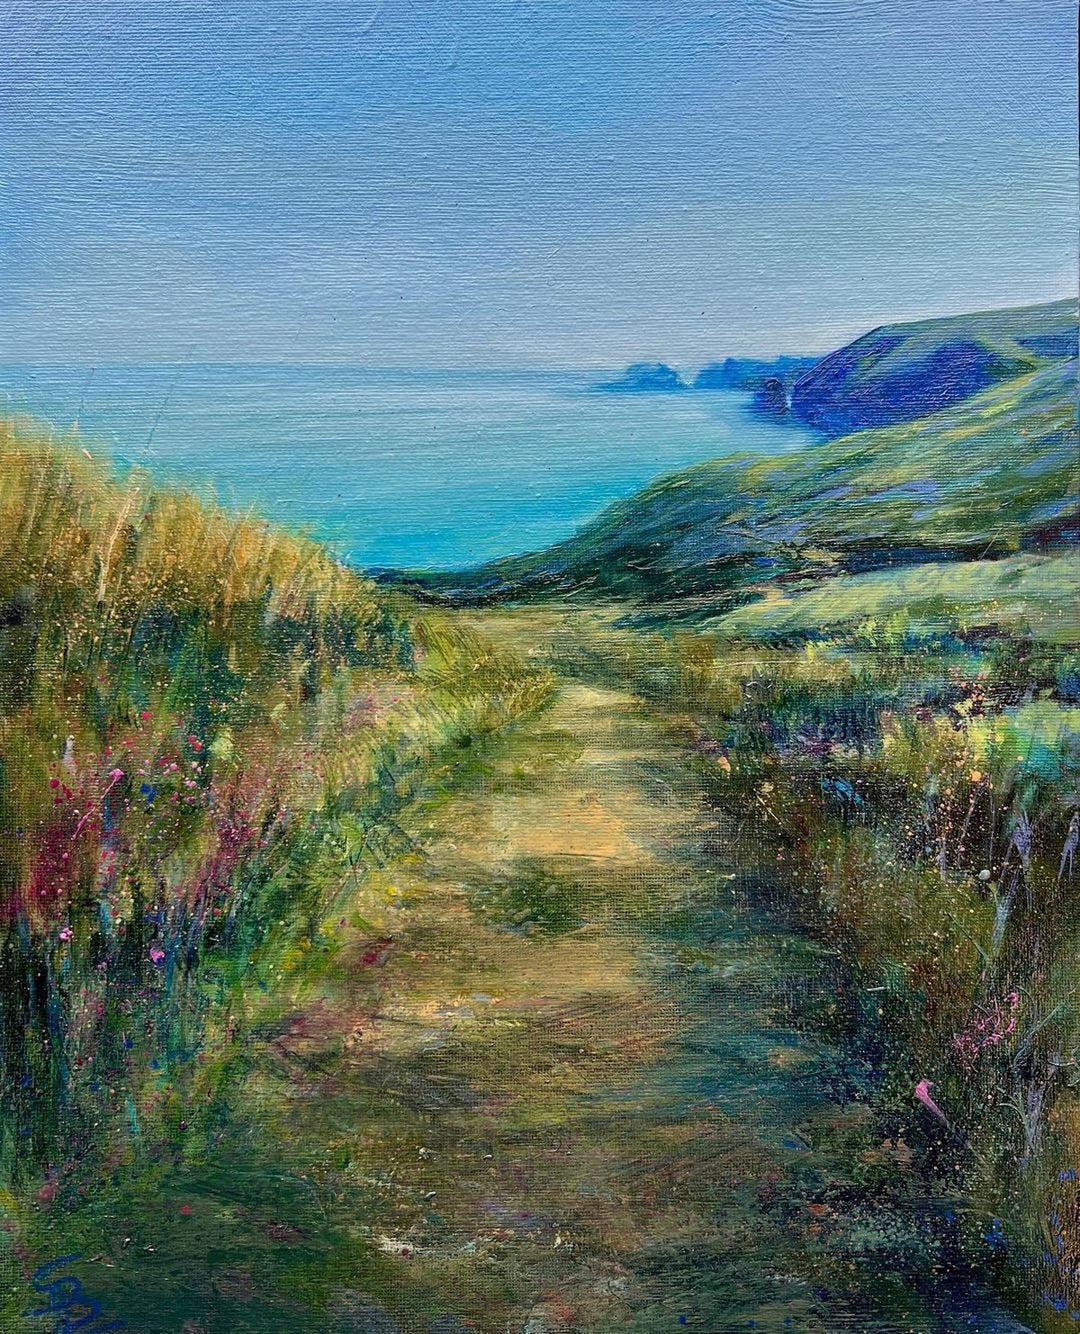 New painting: Small steps forward